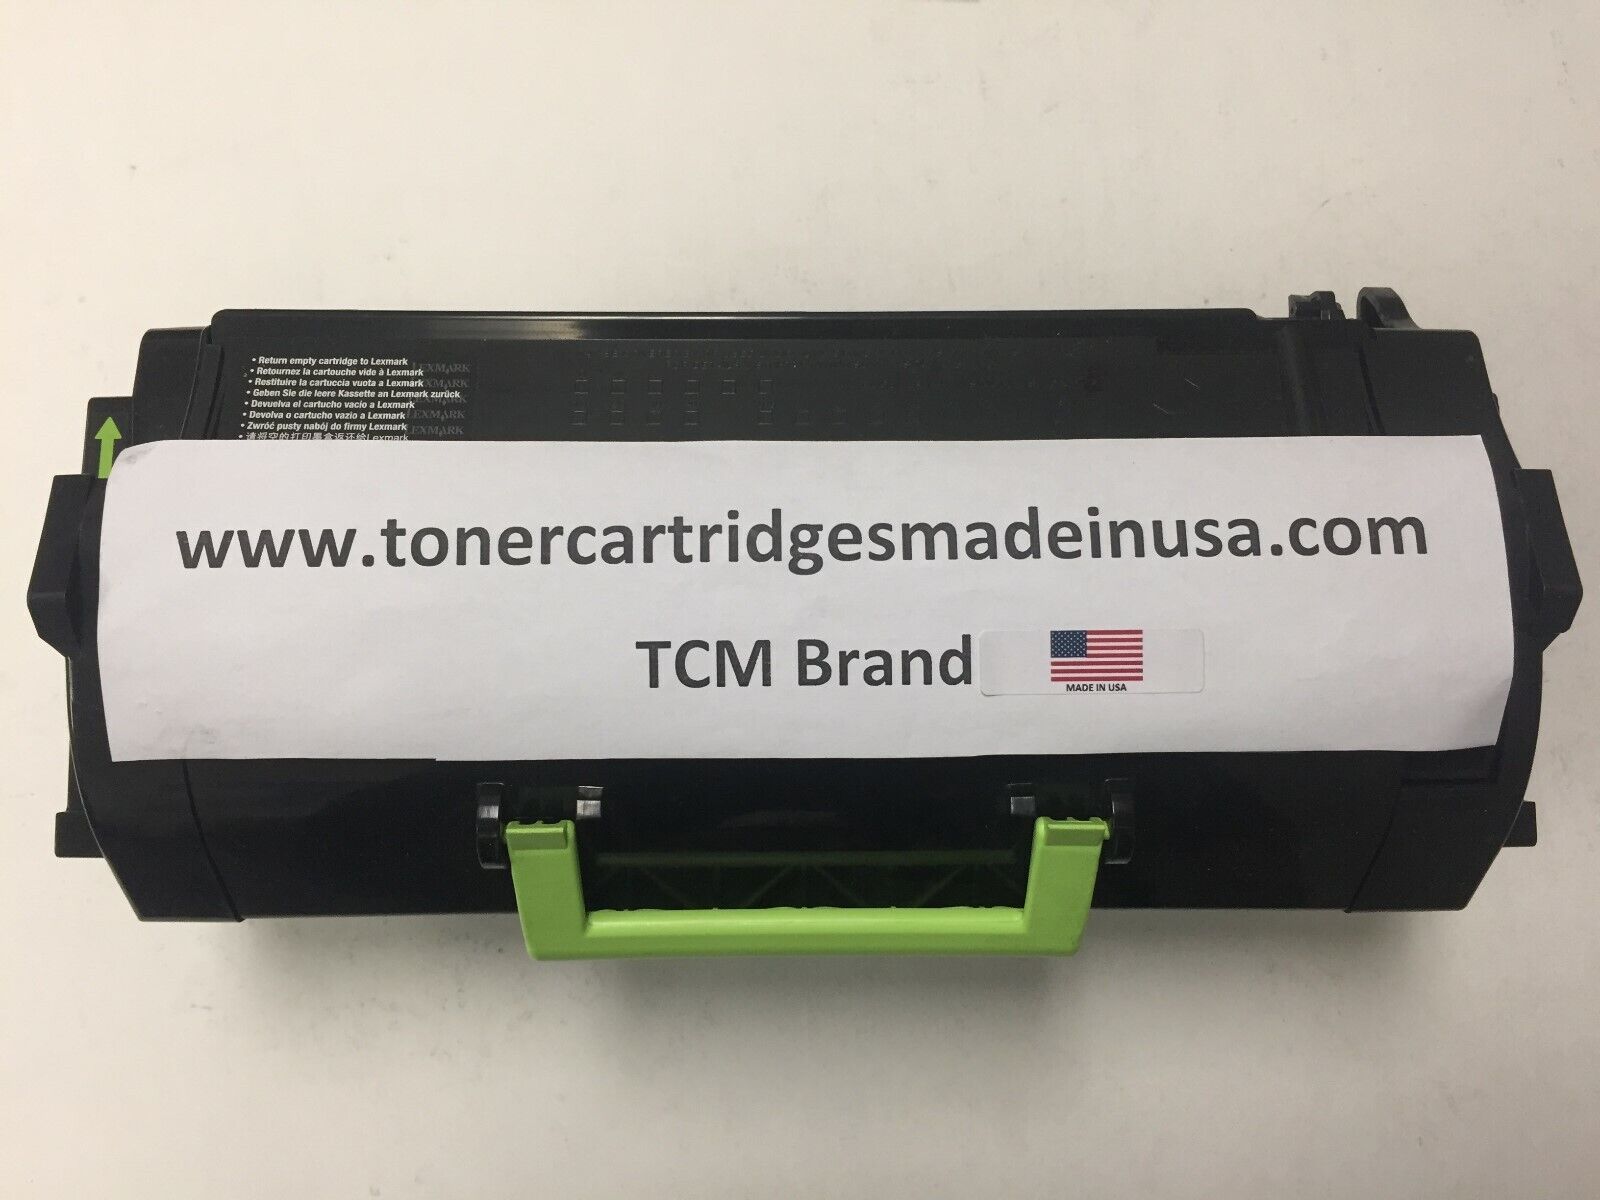 Dell S5830 Alternative Toner Cartridge. TCM USA. Up to 45,000 pages. 54J44. 